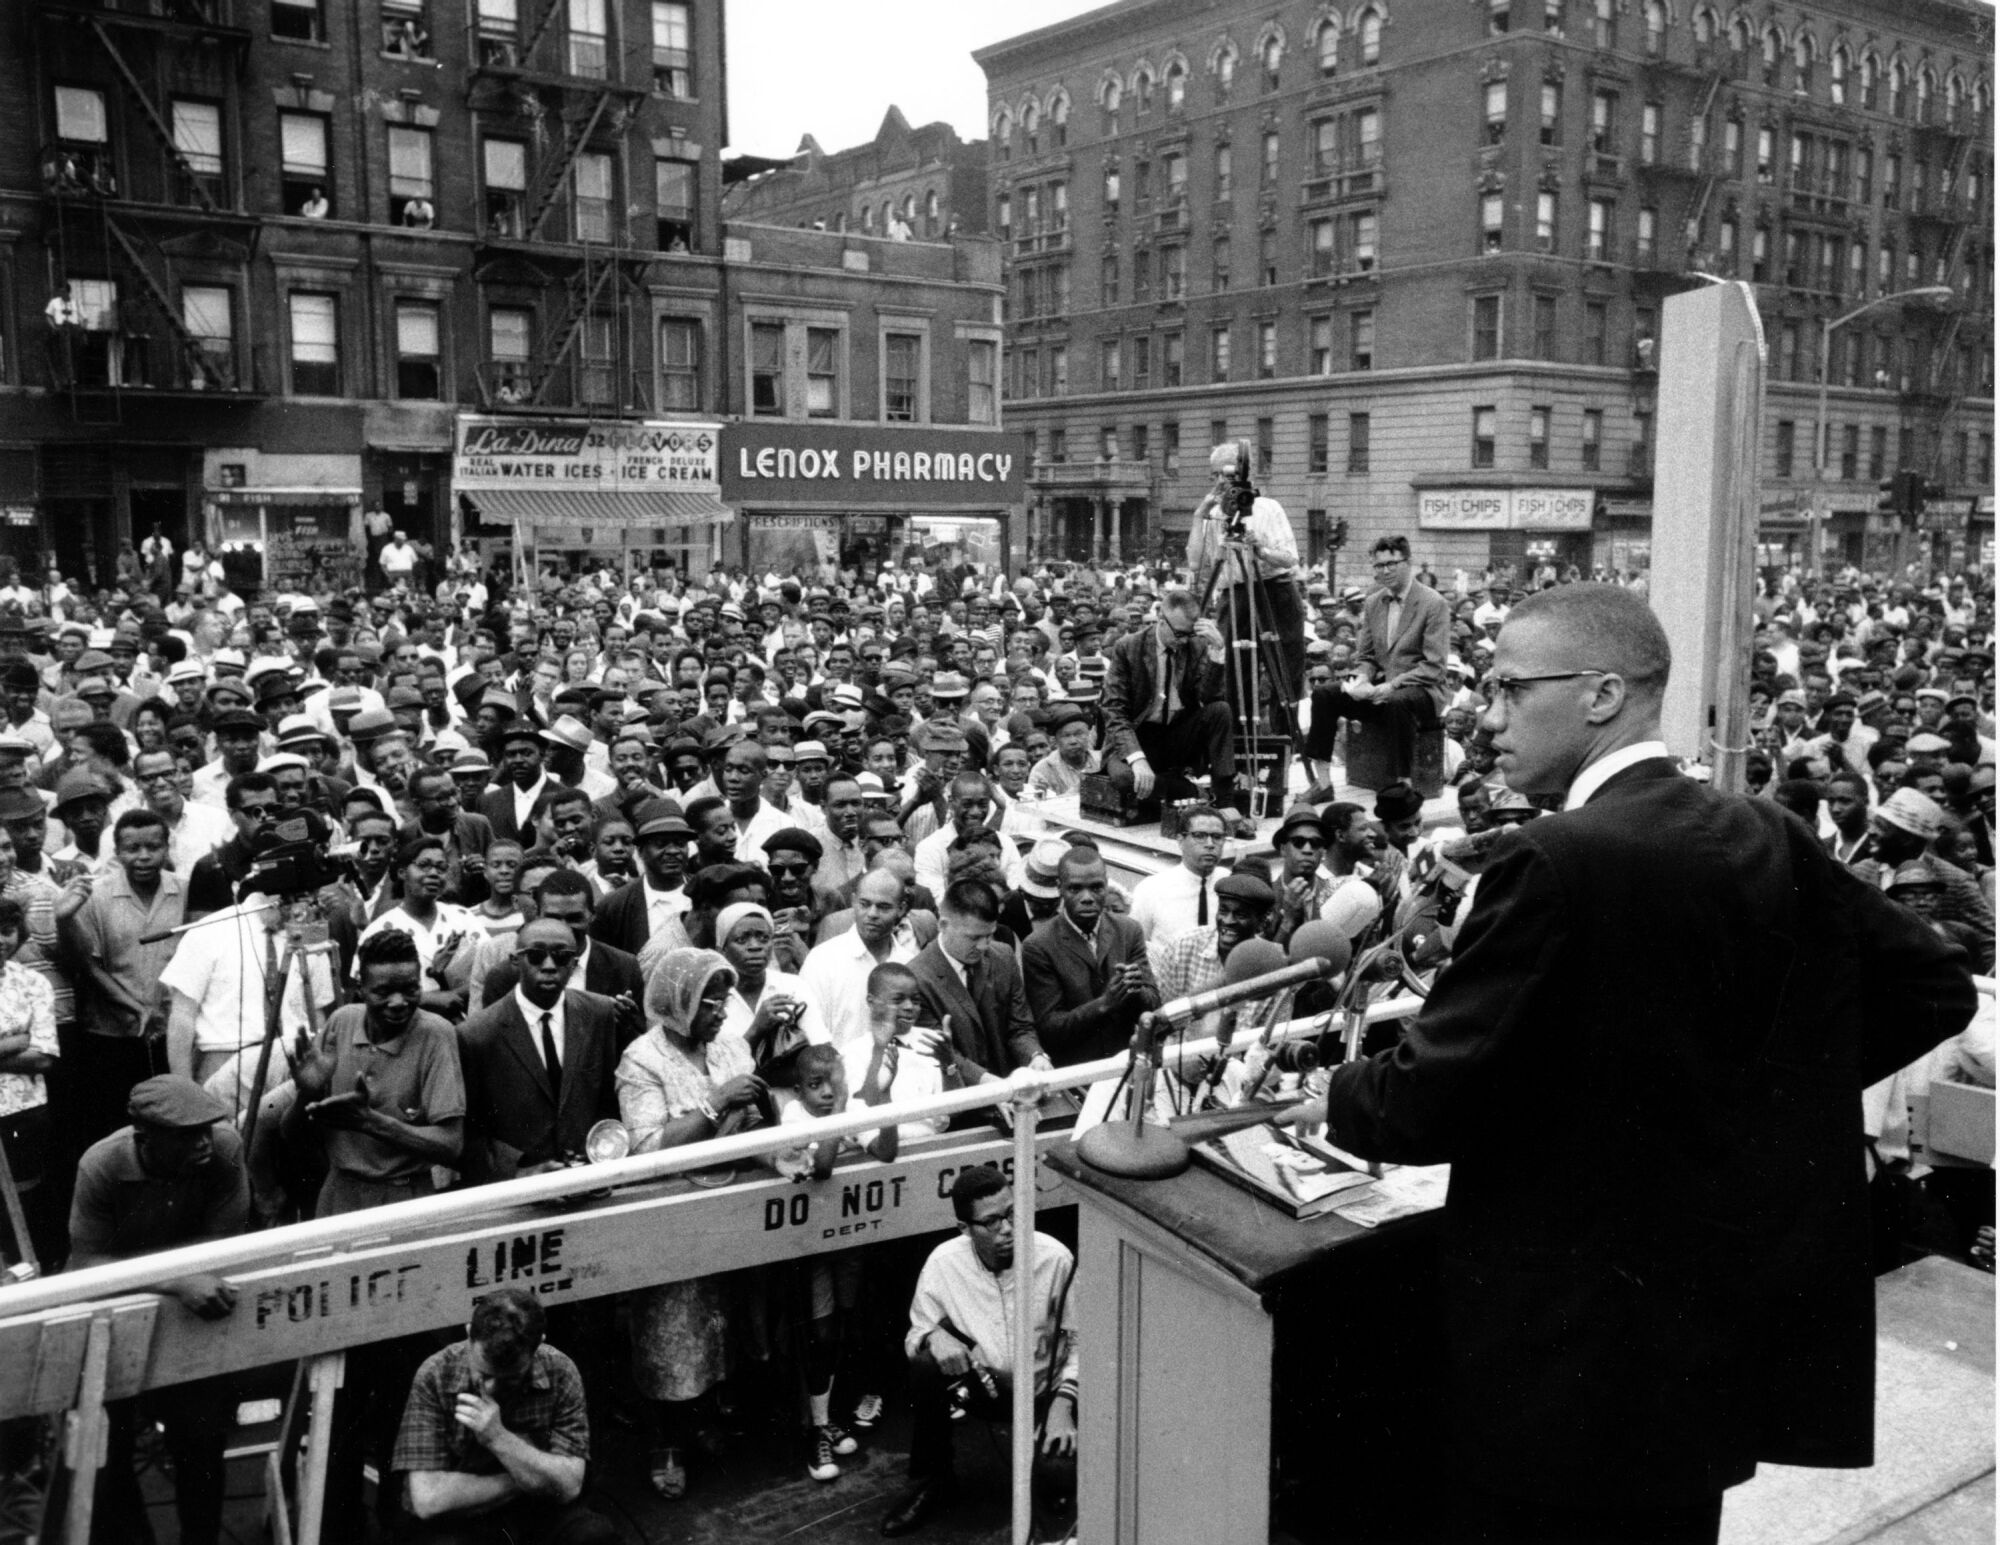 A vintage photo of a man addressing a large crowd